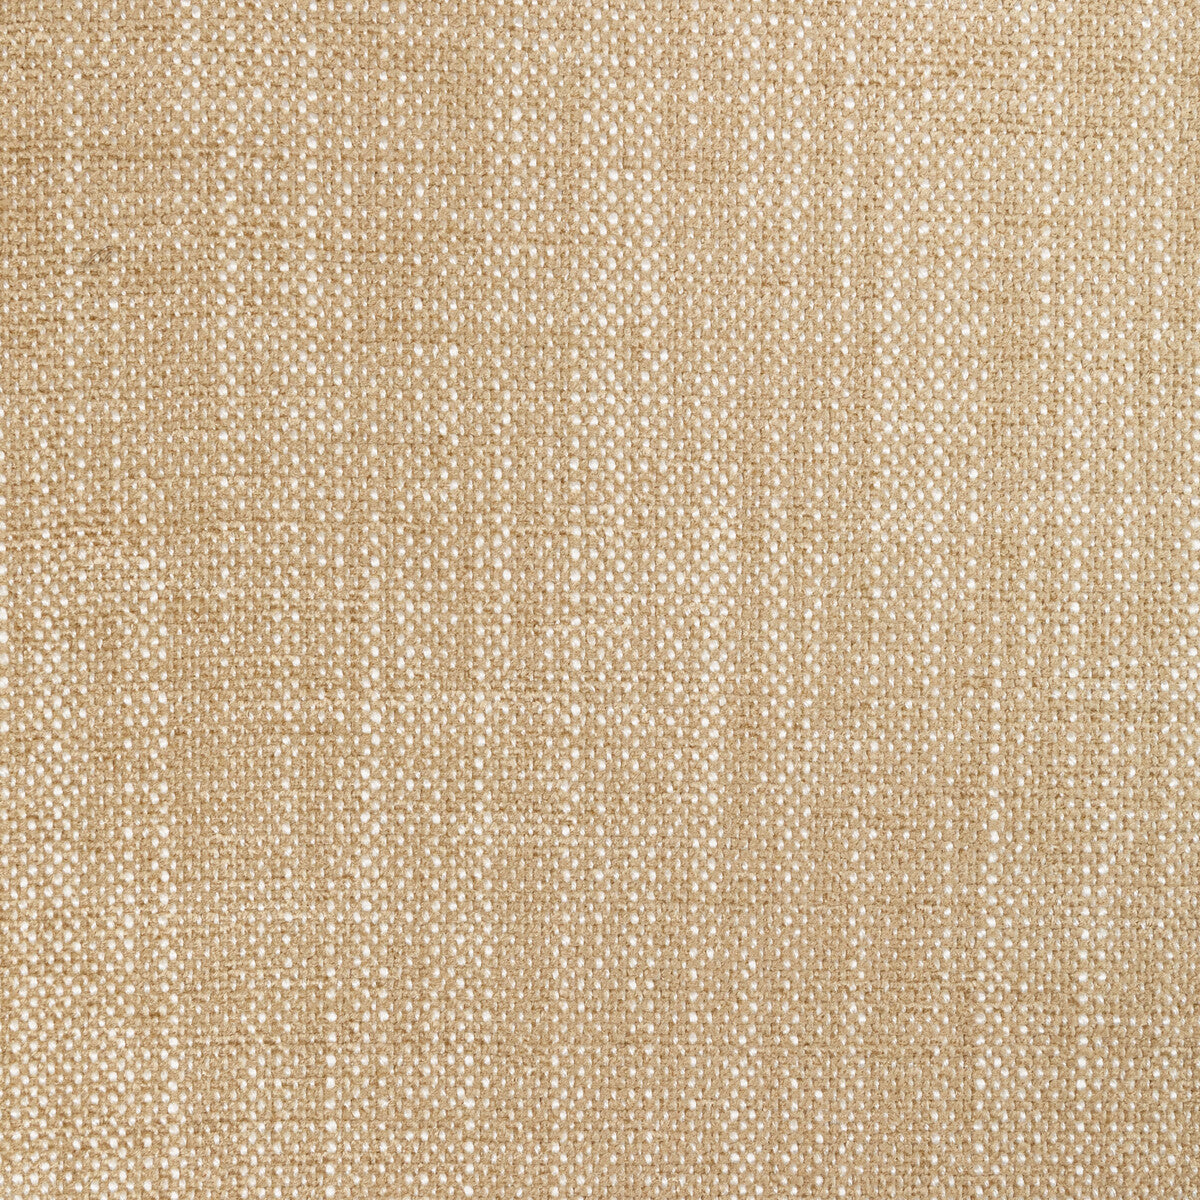 Kravet Design fabric in 36408-16 color - pattern 36408.16.0 - by Kravet Design in the Performance Crypton Home collection